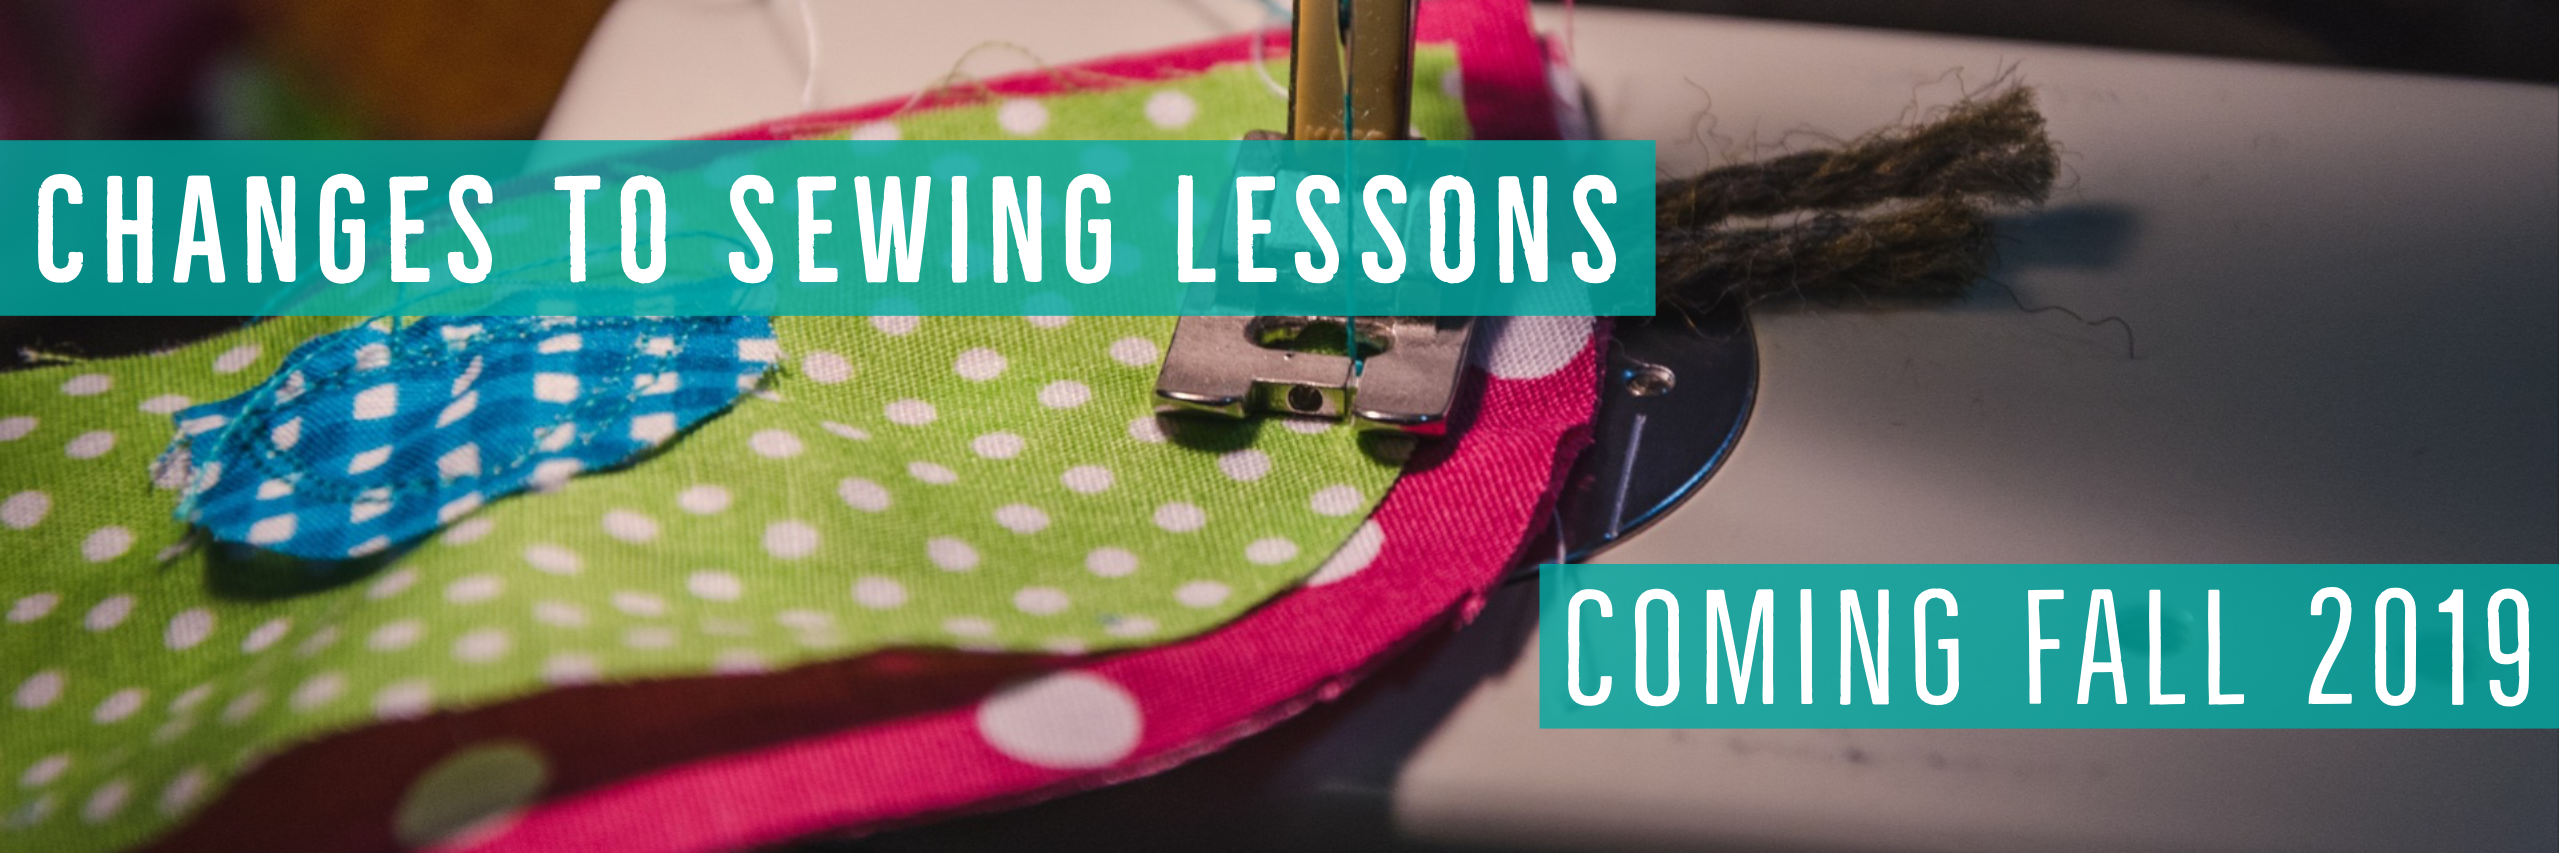 Changes to Sewing Lessons - Fall 2019 - Stacey Sansom Designs